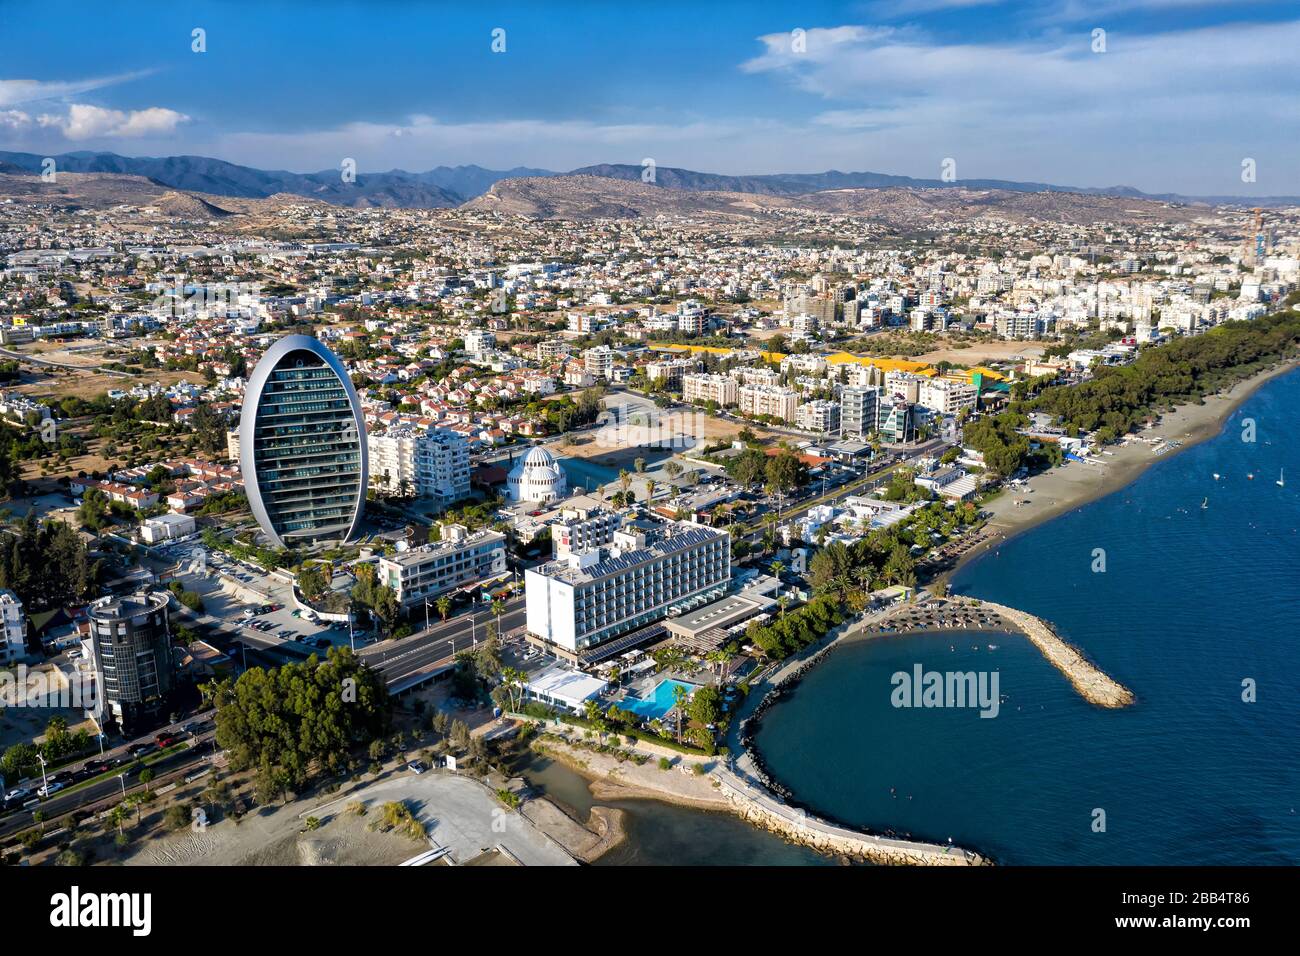 Aerial view of Limassol, Cyprus Stock Photo